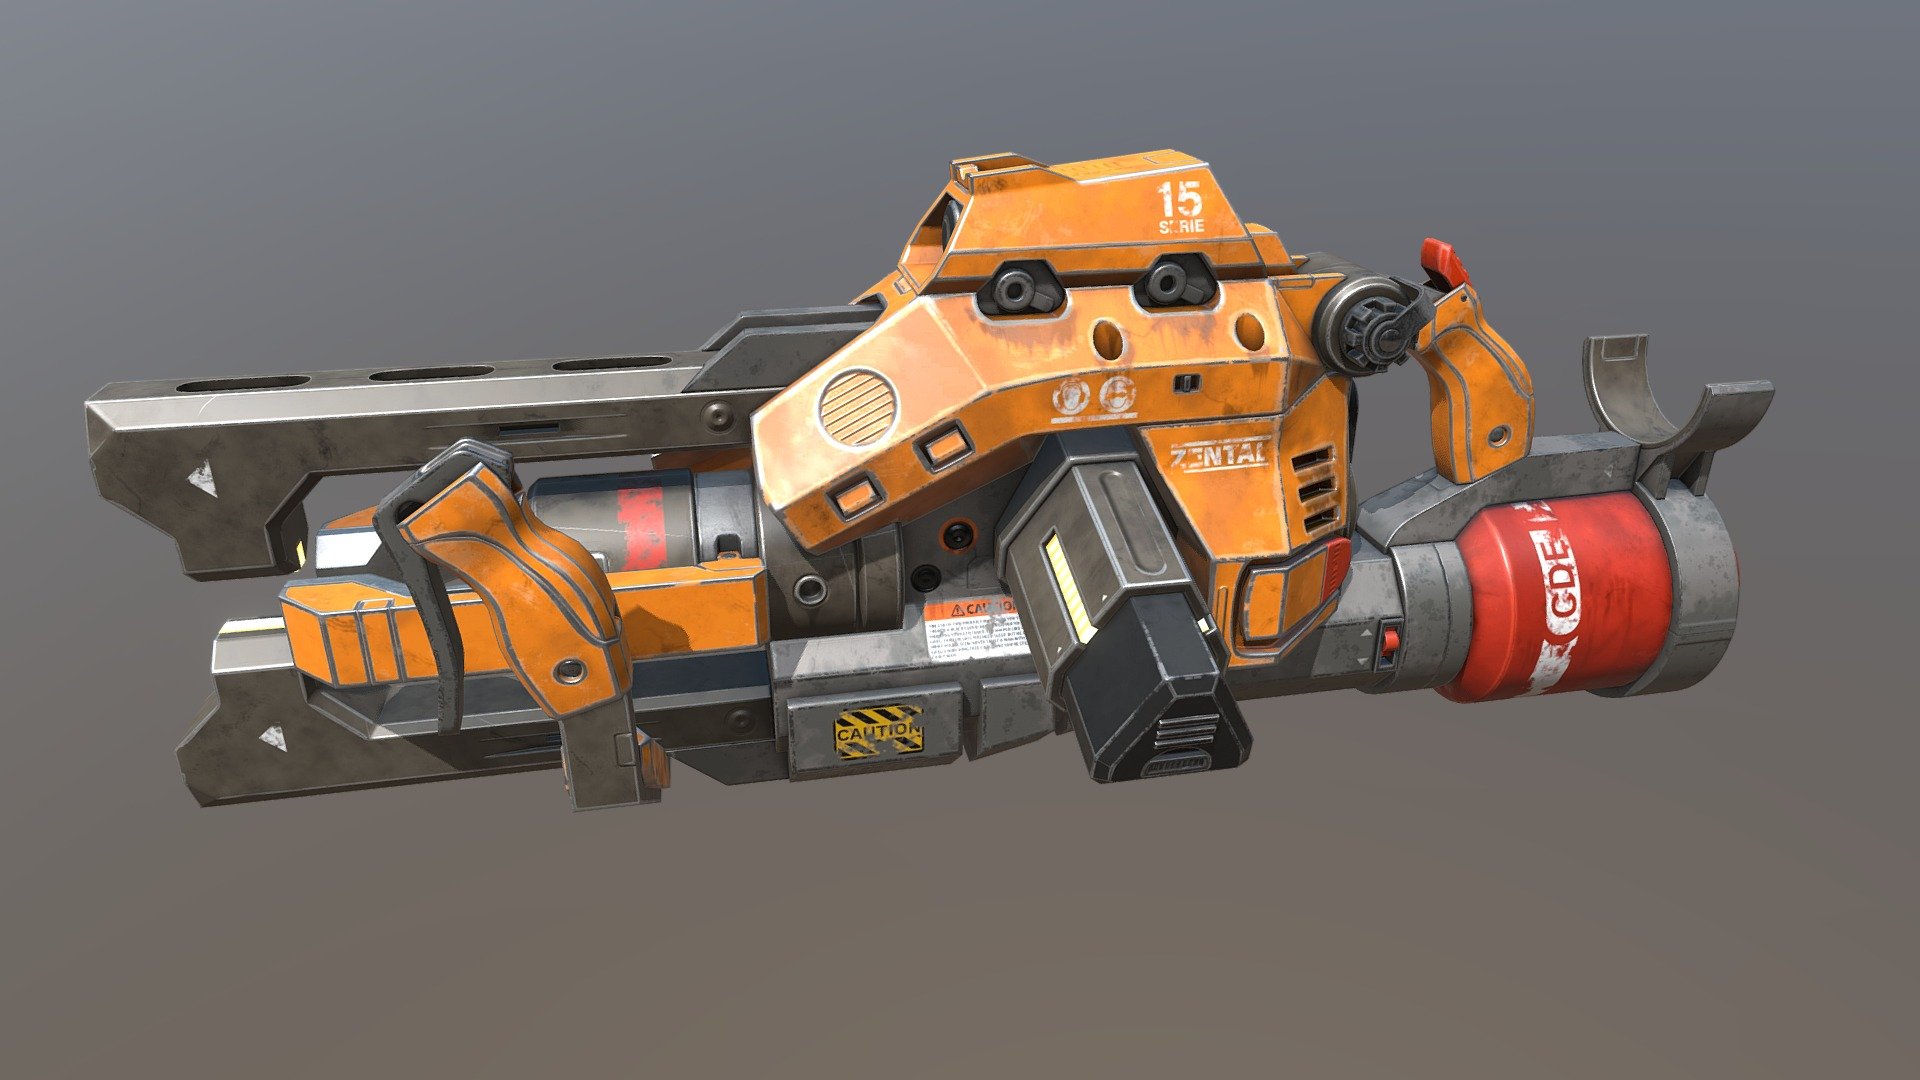 Mining tool from Asteroids Outpost game - Heavy mining tool - 3D model by Alex (@i.aleksey.yakovlev) 3d model